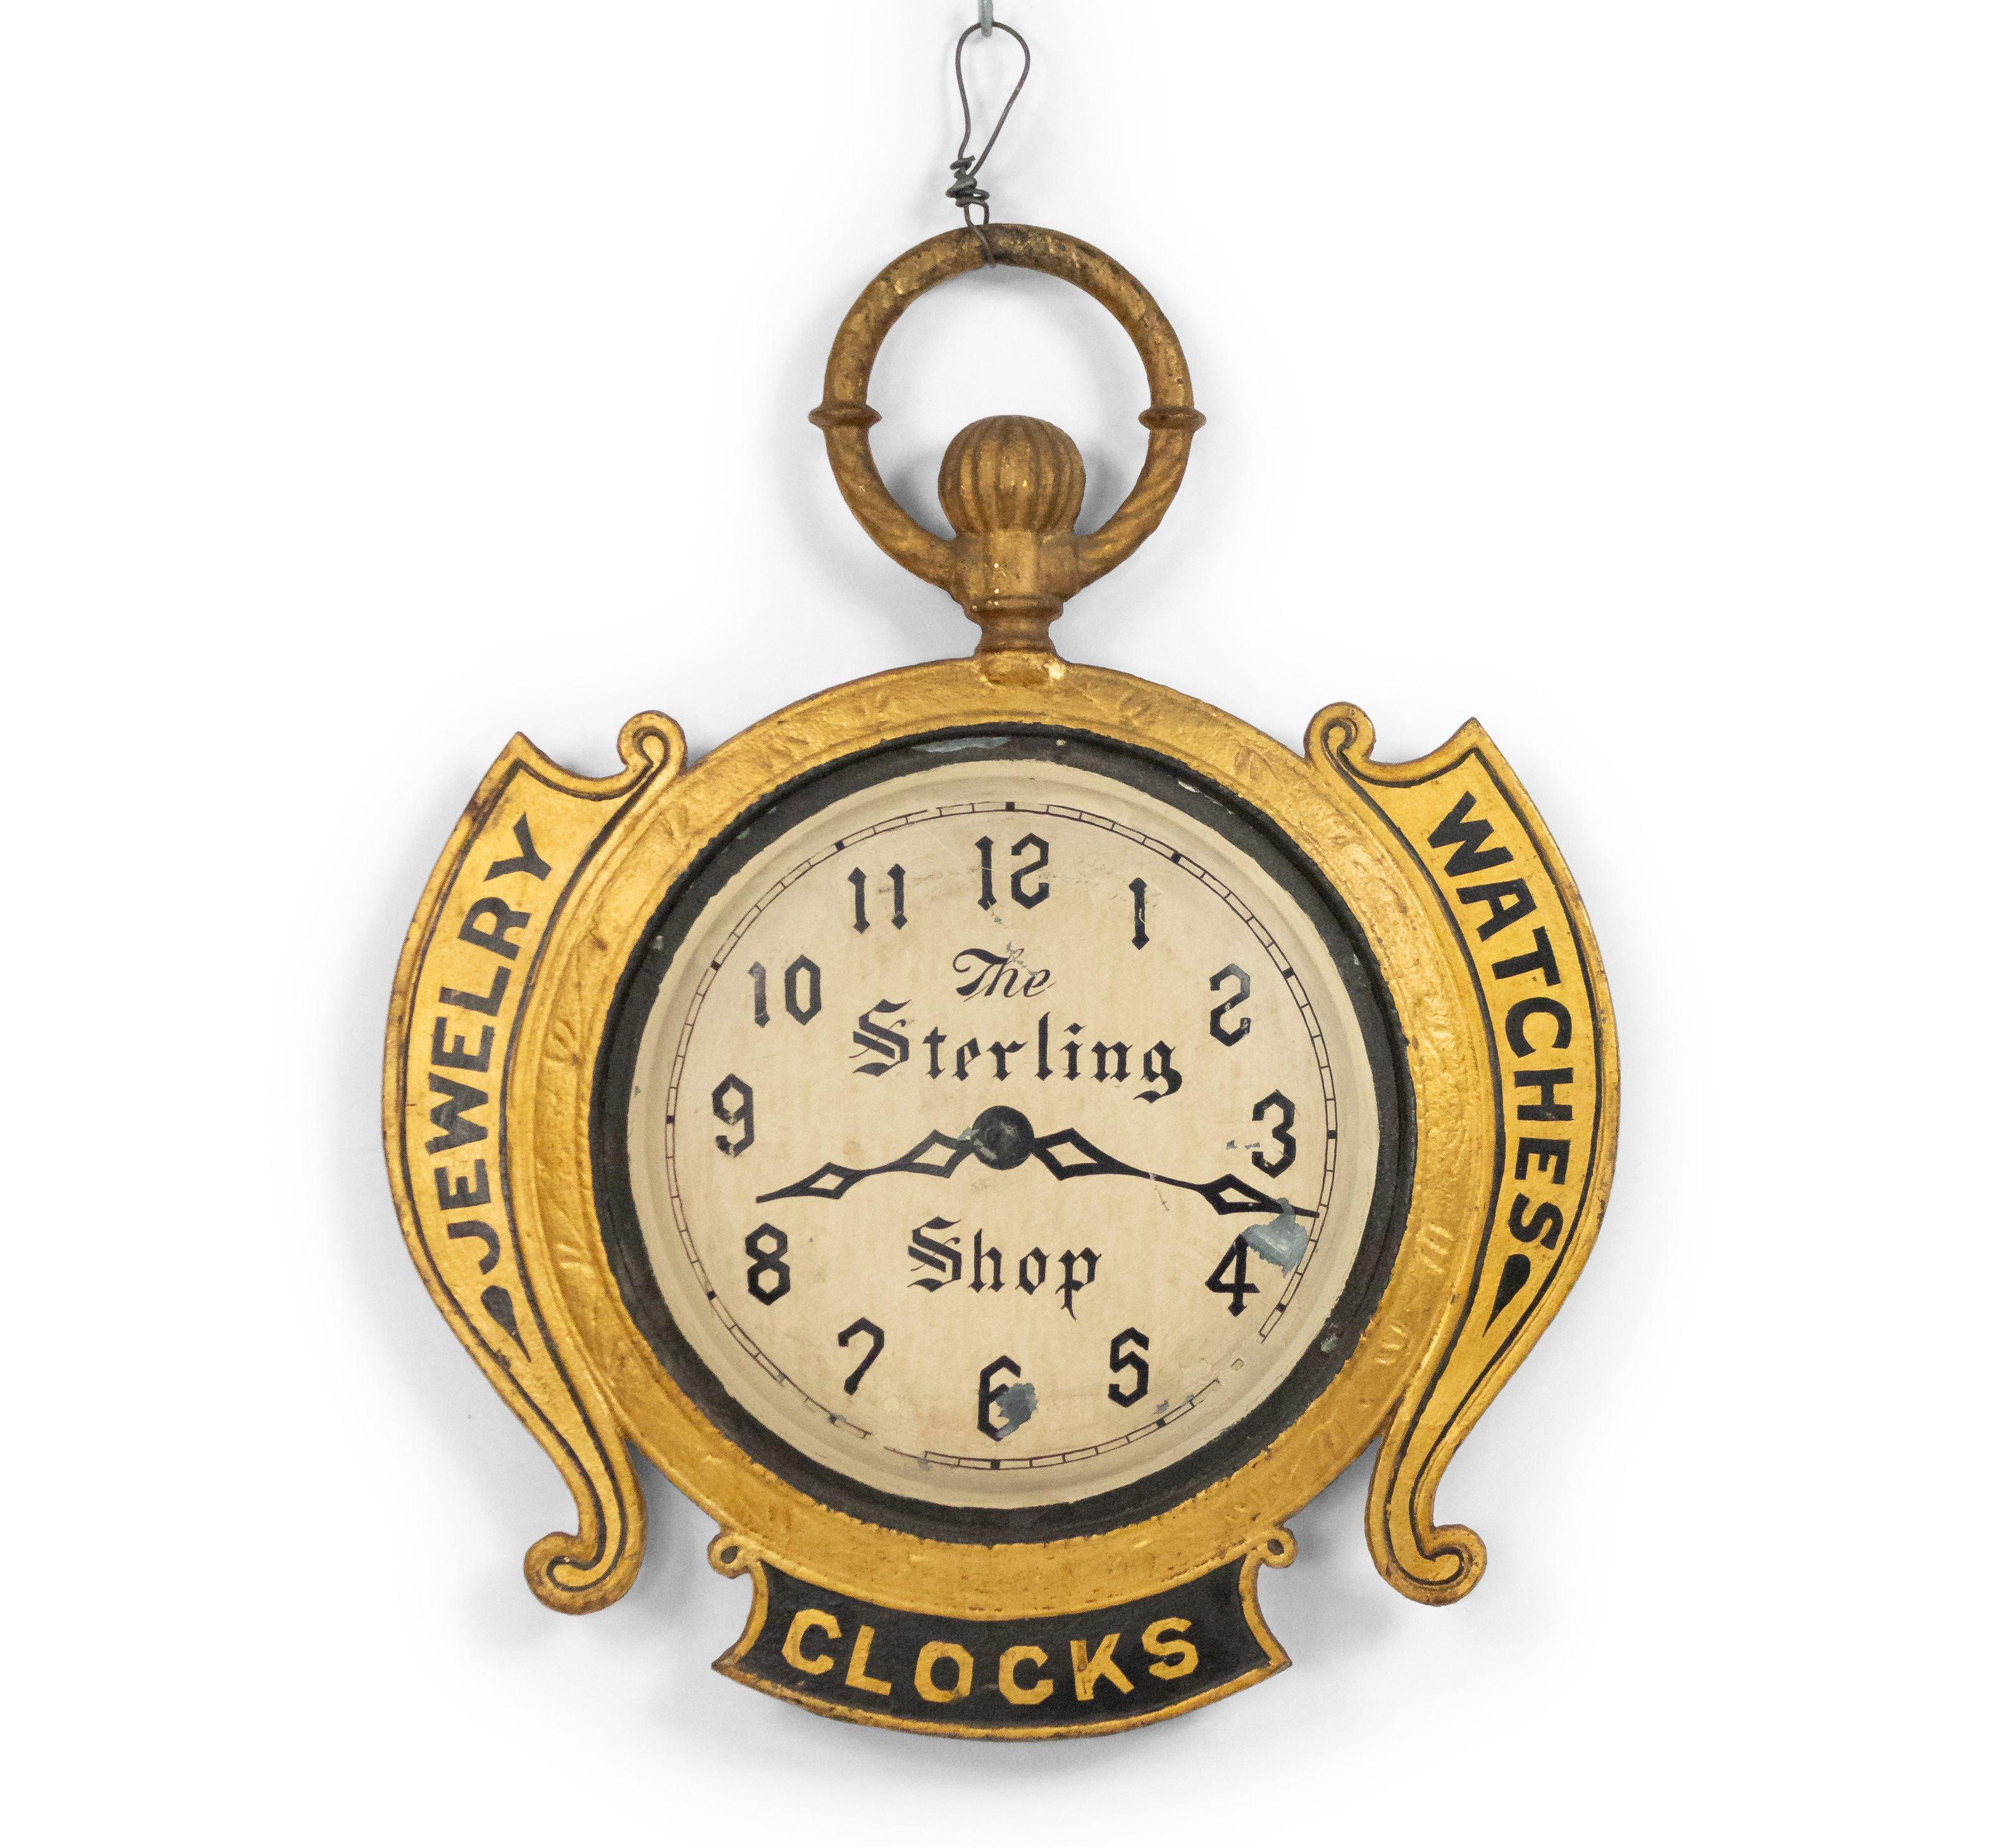 American Country (19th Century) painted tole gold trimmed double sided clock sign in the form of a pocket watch.
